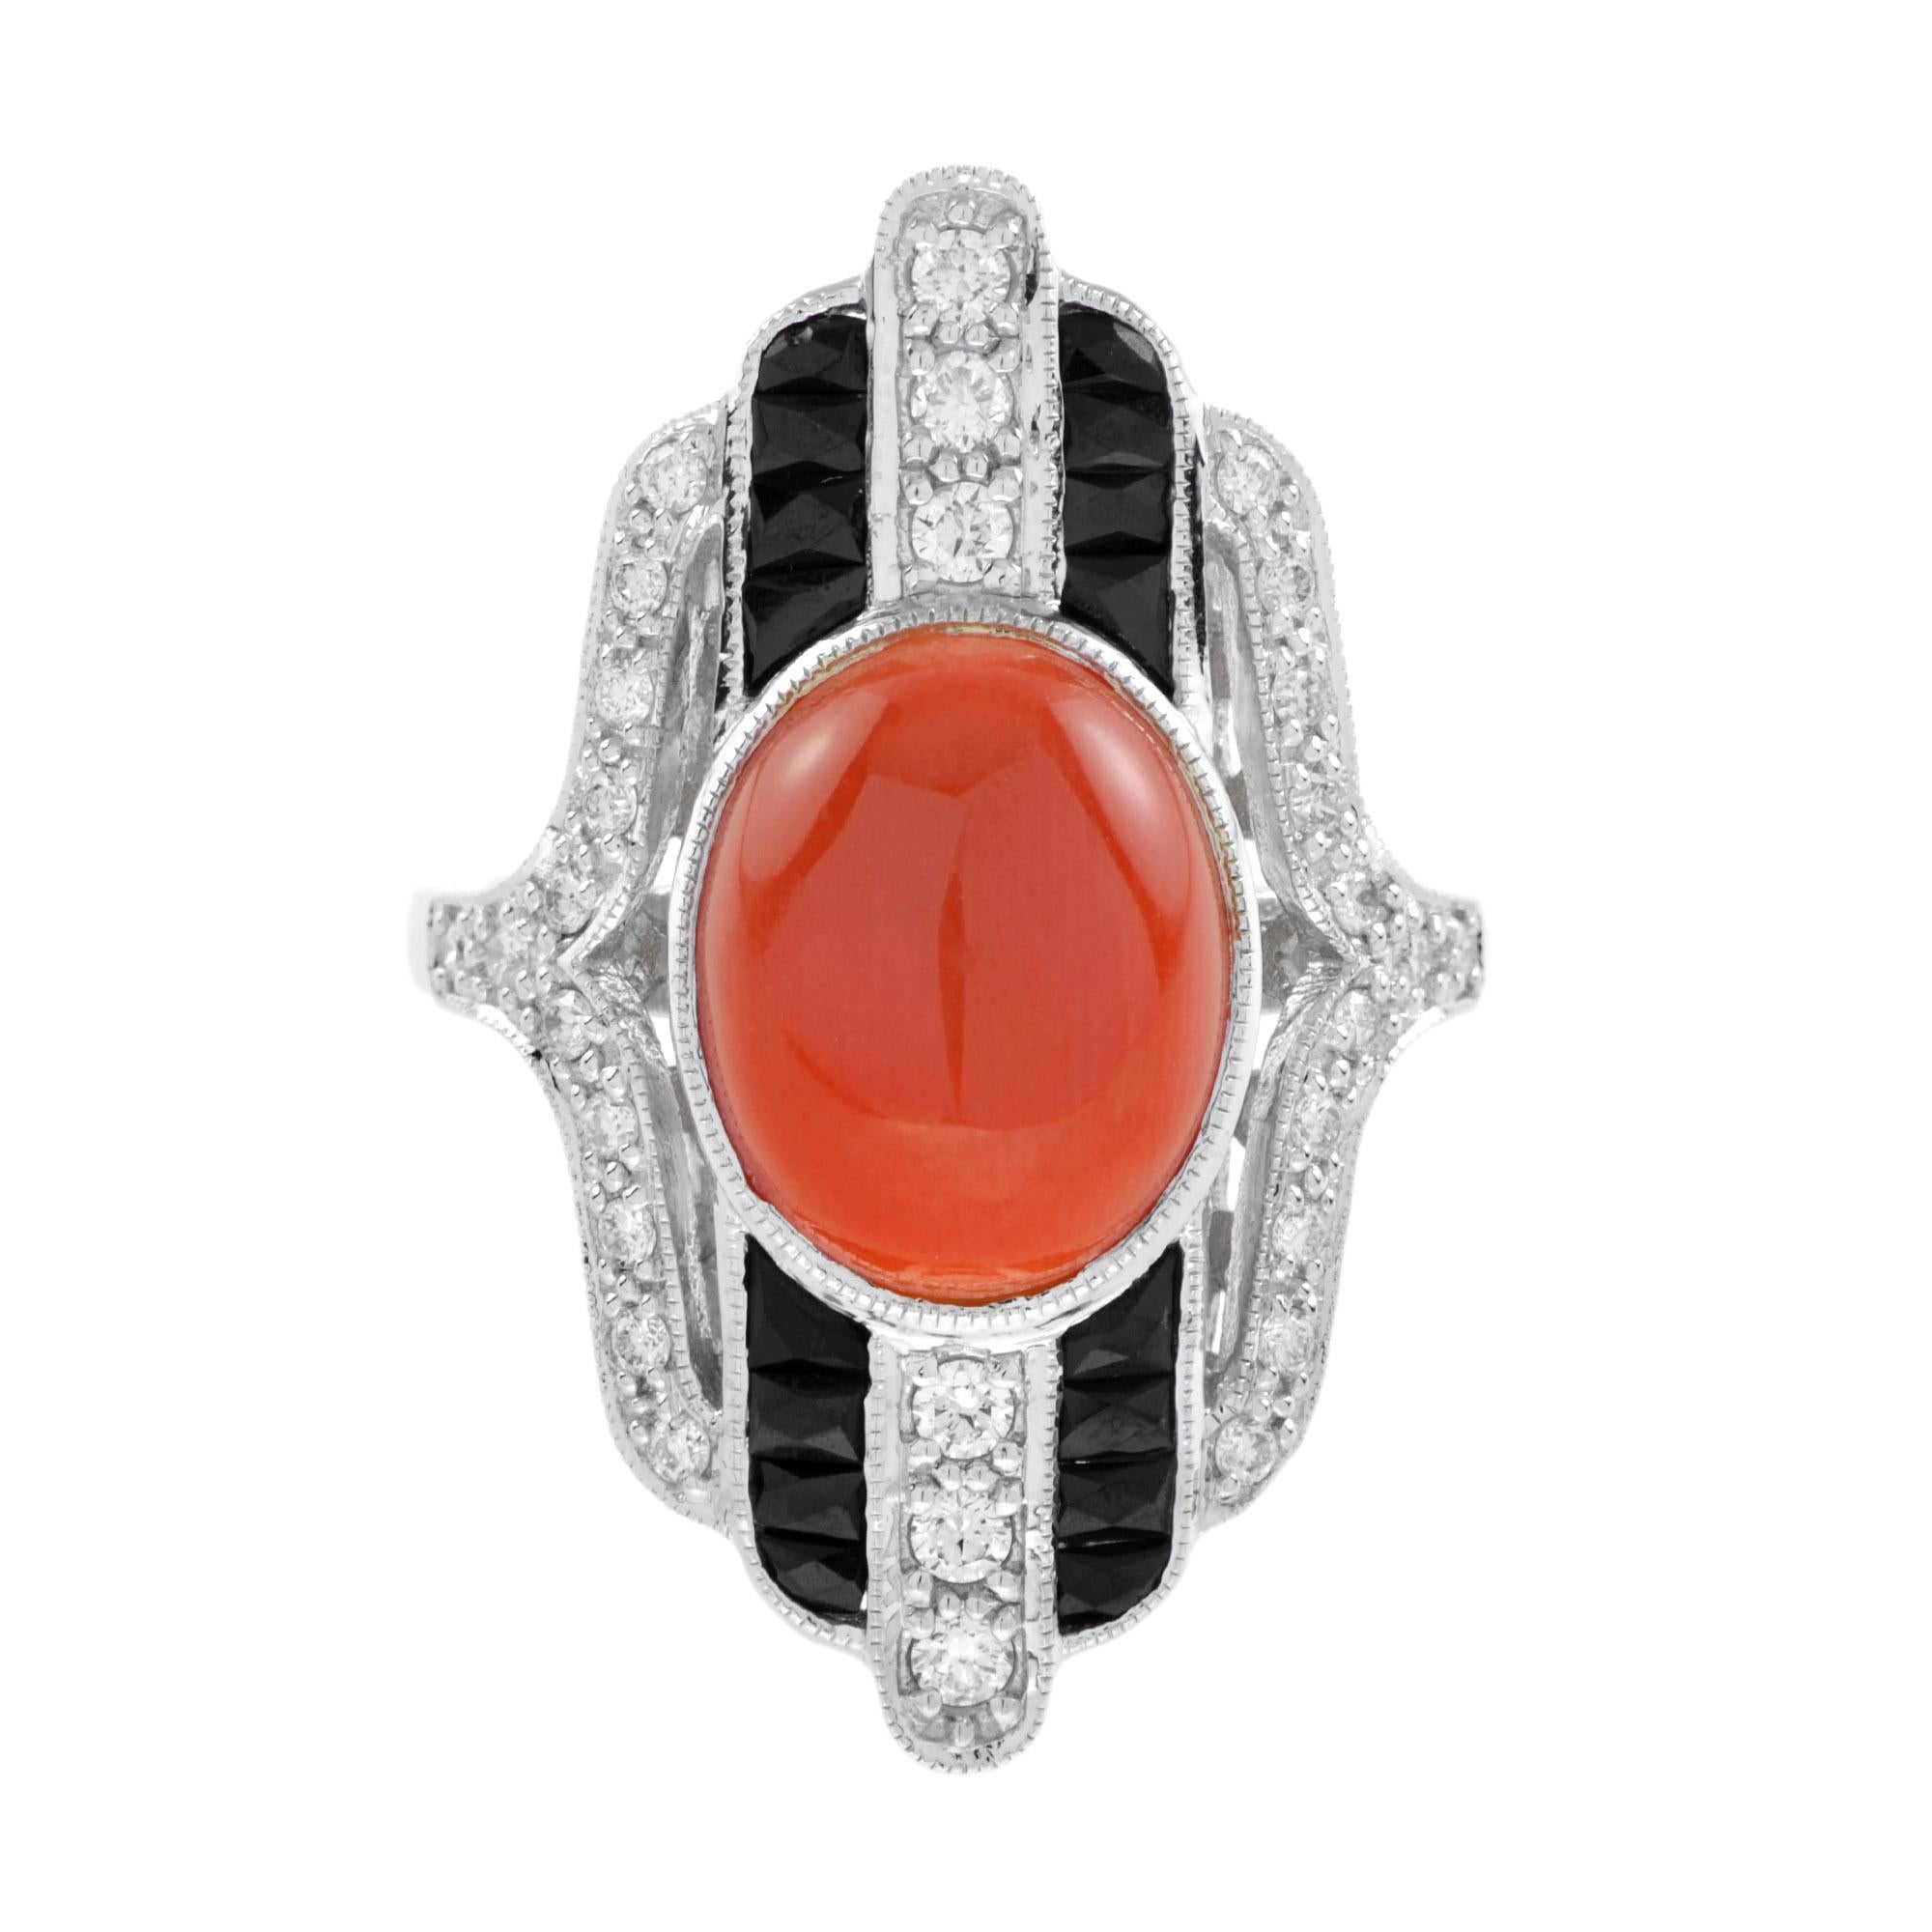 Simply beautiful and finely detailed cocktail ring center securely set with a 5 carat oval cabochon coral accented by onyx and diamond. Handcrafted in 14k white gold. The perfect accessory for the modern woman! Ready to wear from day to evening with